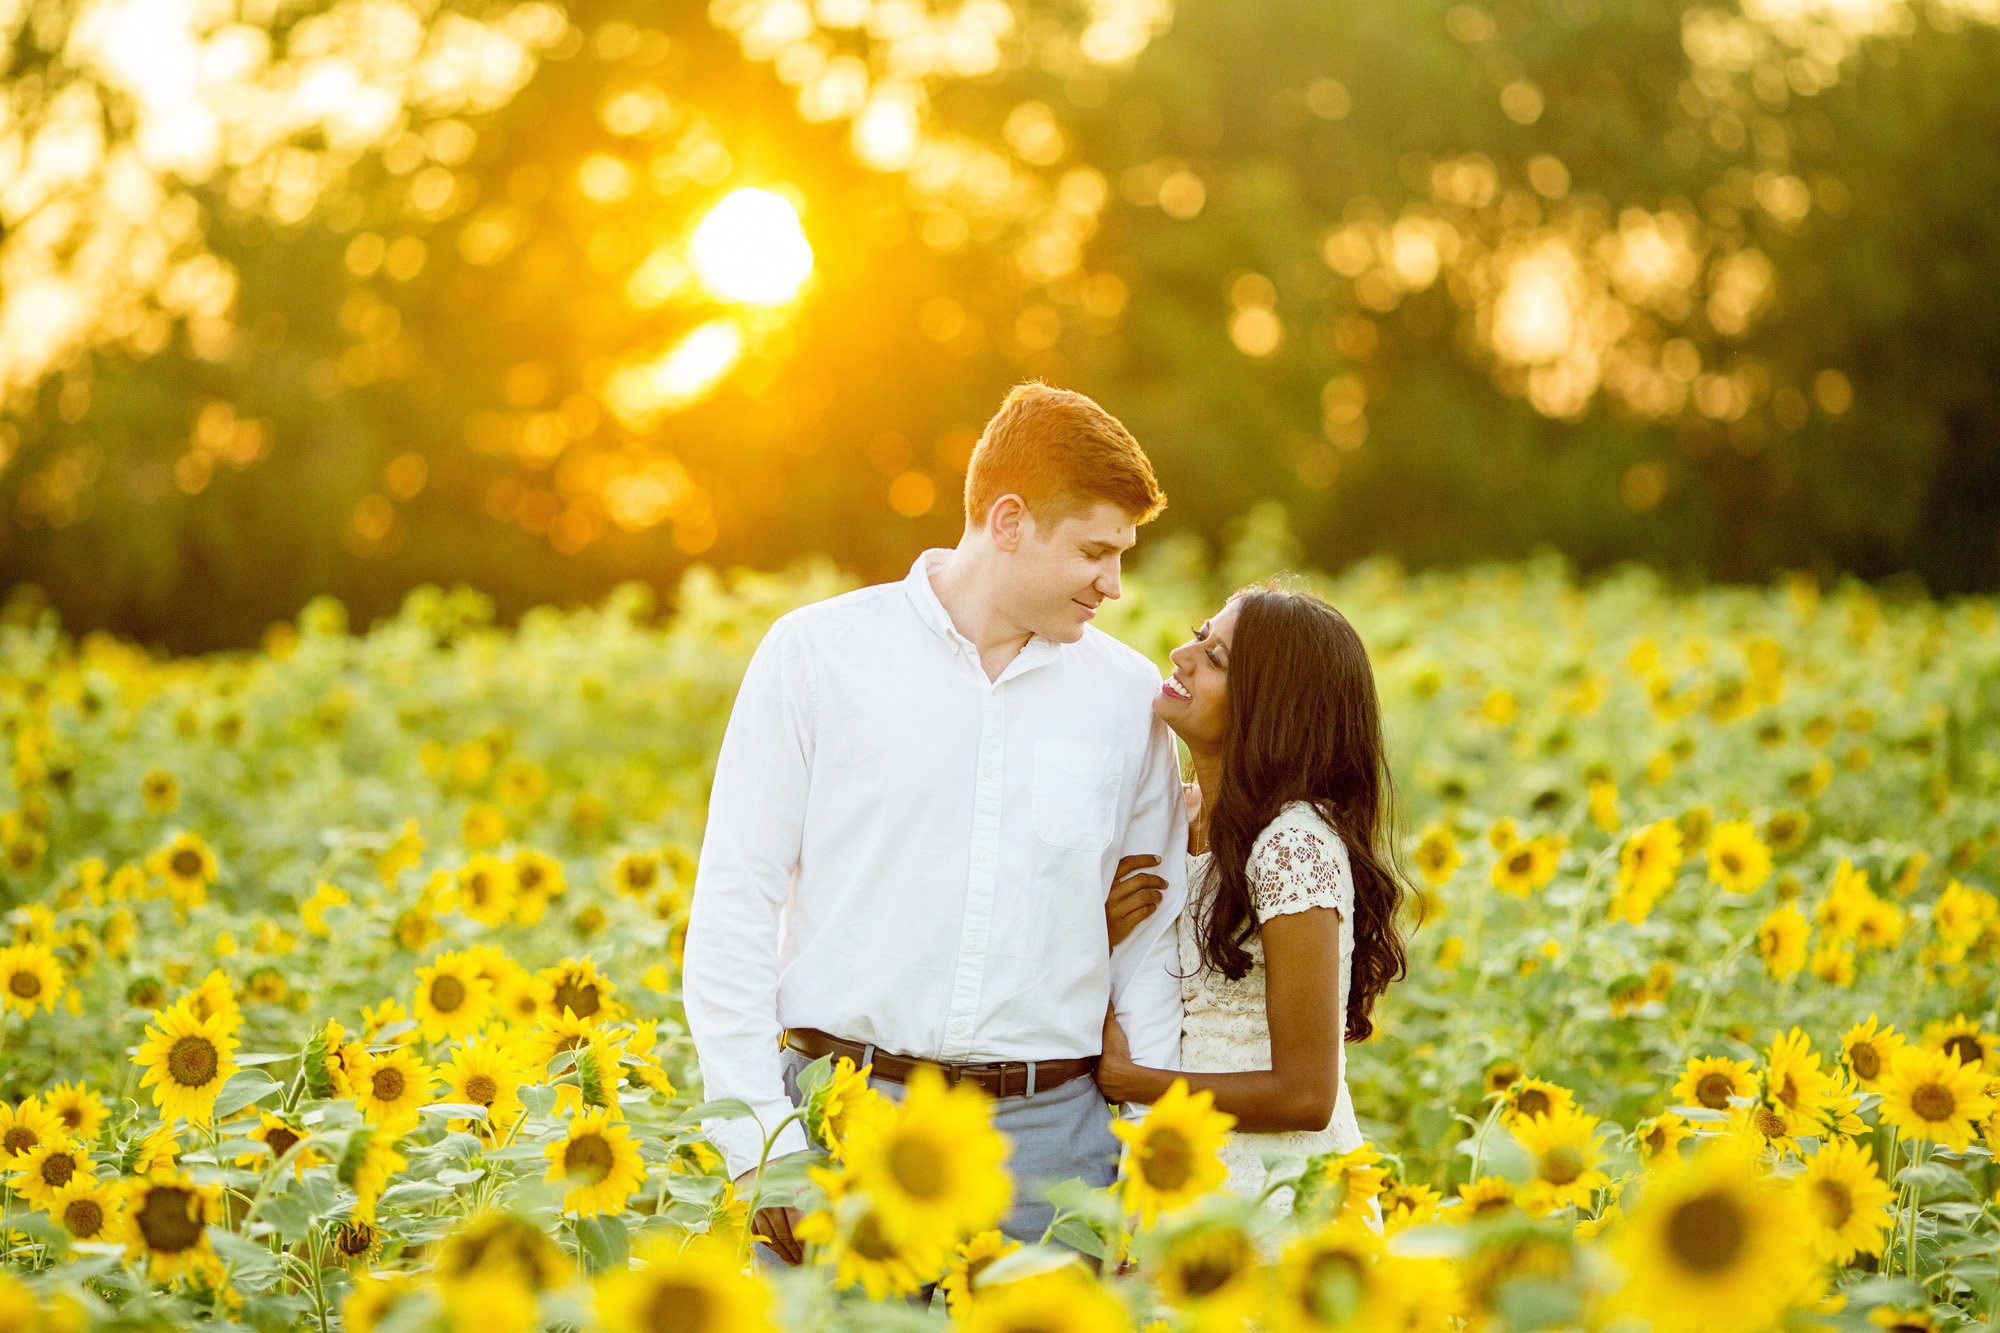 Seriously_Sabrina_Photography_Lexington_Midway_Kentucky_Engagement_Merefield_Sunflowers_Naz_and_Drew19.jpg